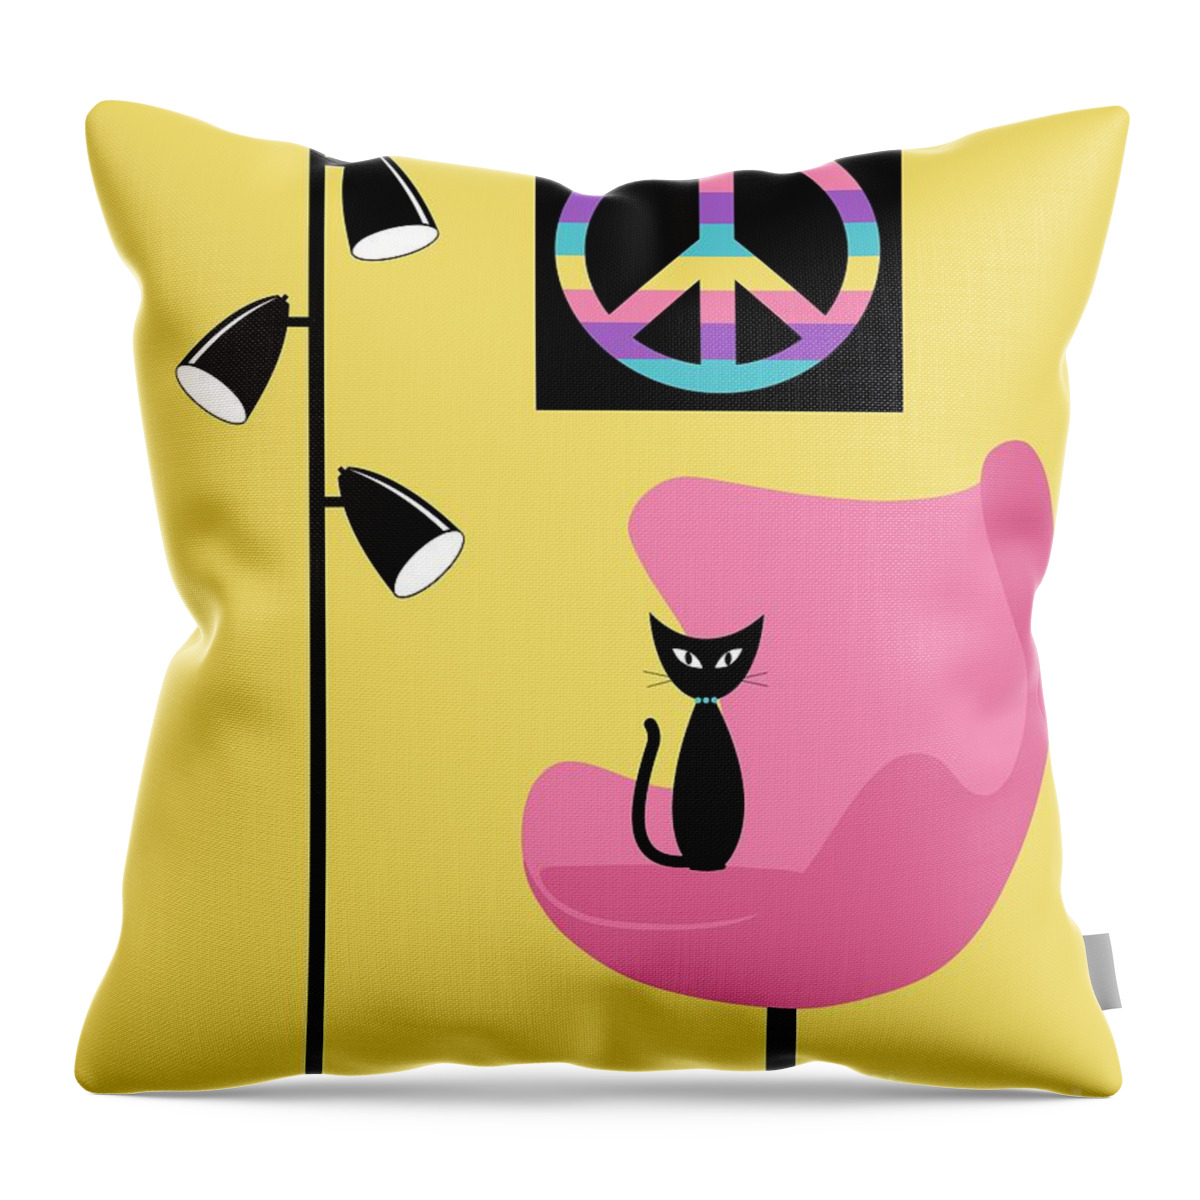 Peace Throw Pillow featuring the digital art Peace Symbol by Donna Mibus